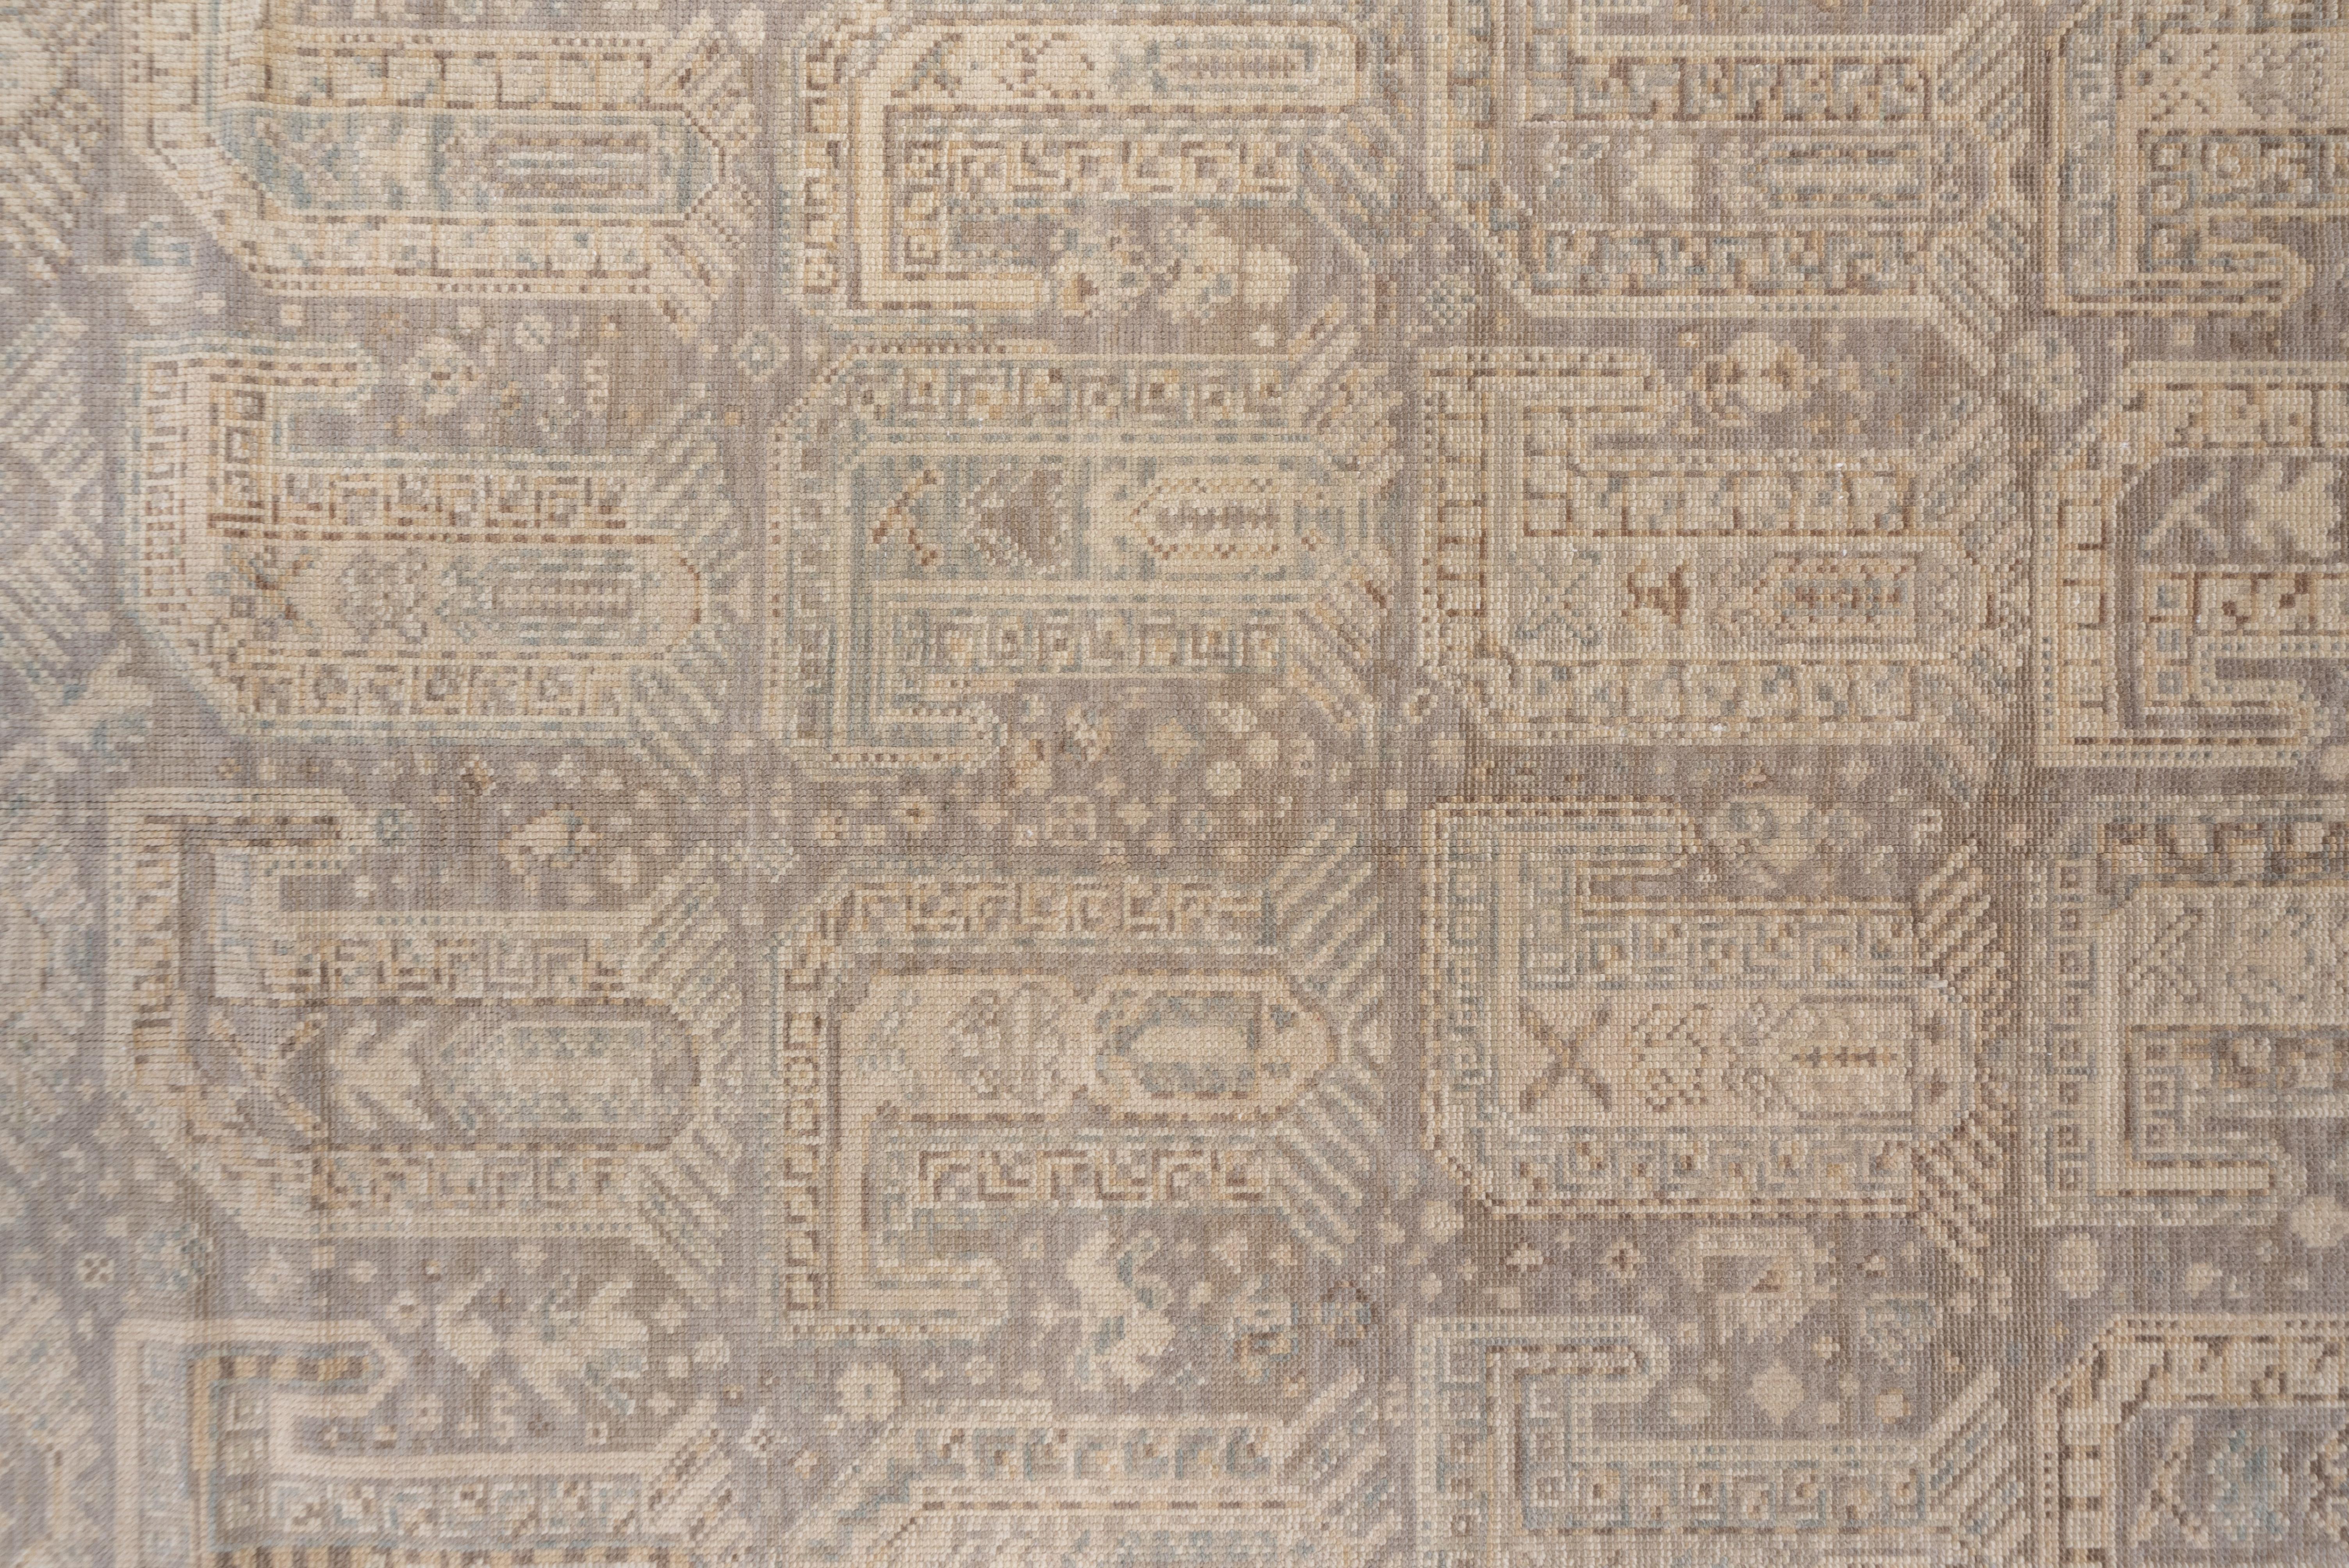 Tribal Neutral Antique Turkish Sivas Rug, Light Gray Field, Paisley All-Over Design For Sale